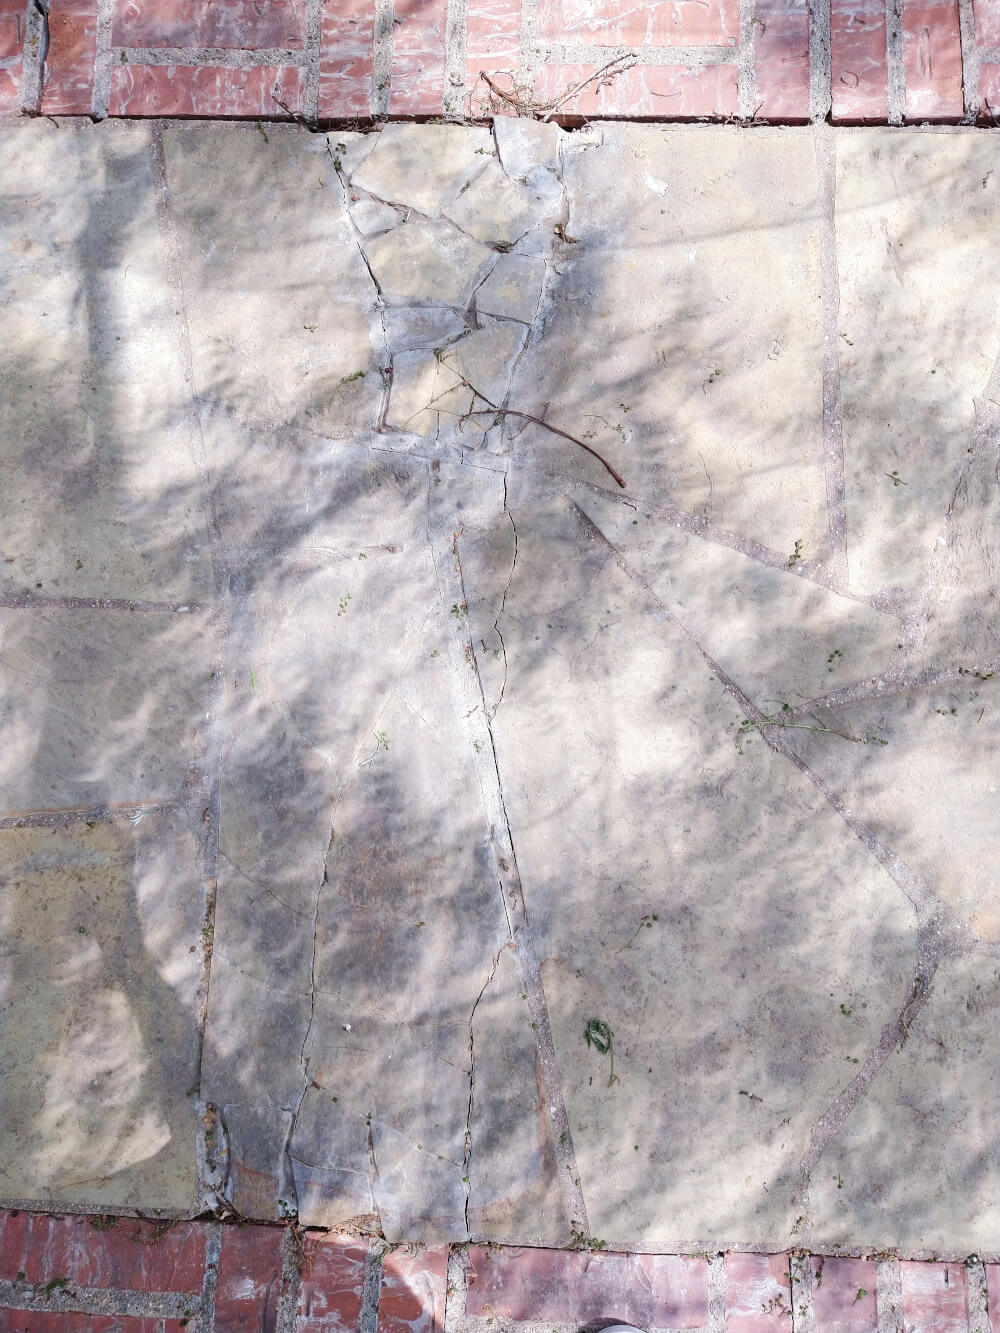 Shadow bands during solar eclipse, plus the eclipse projected through the trees. on a stone private walk